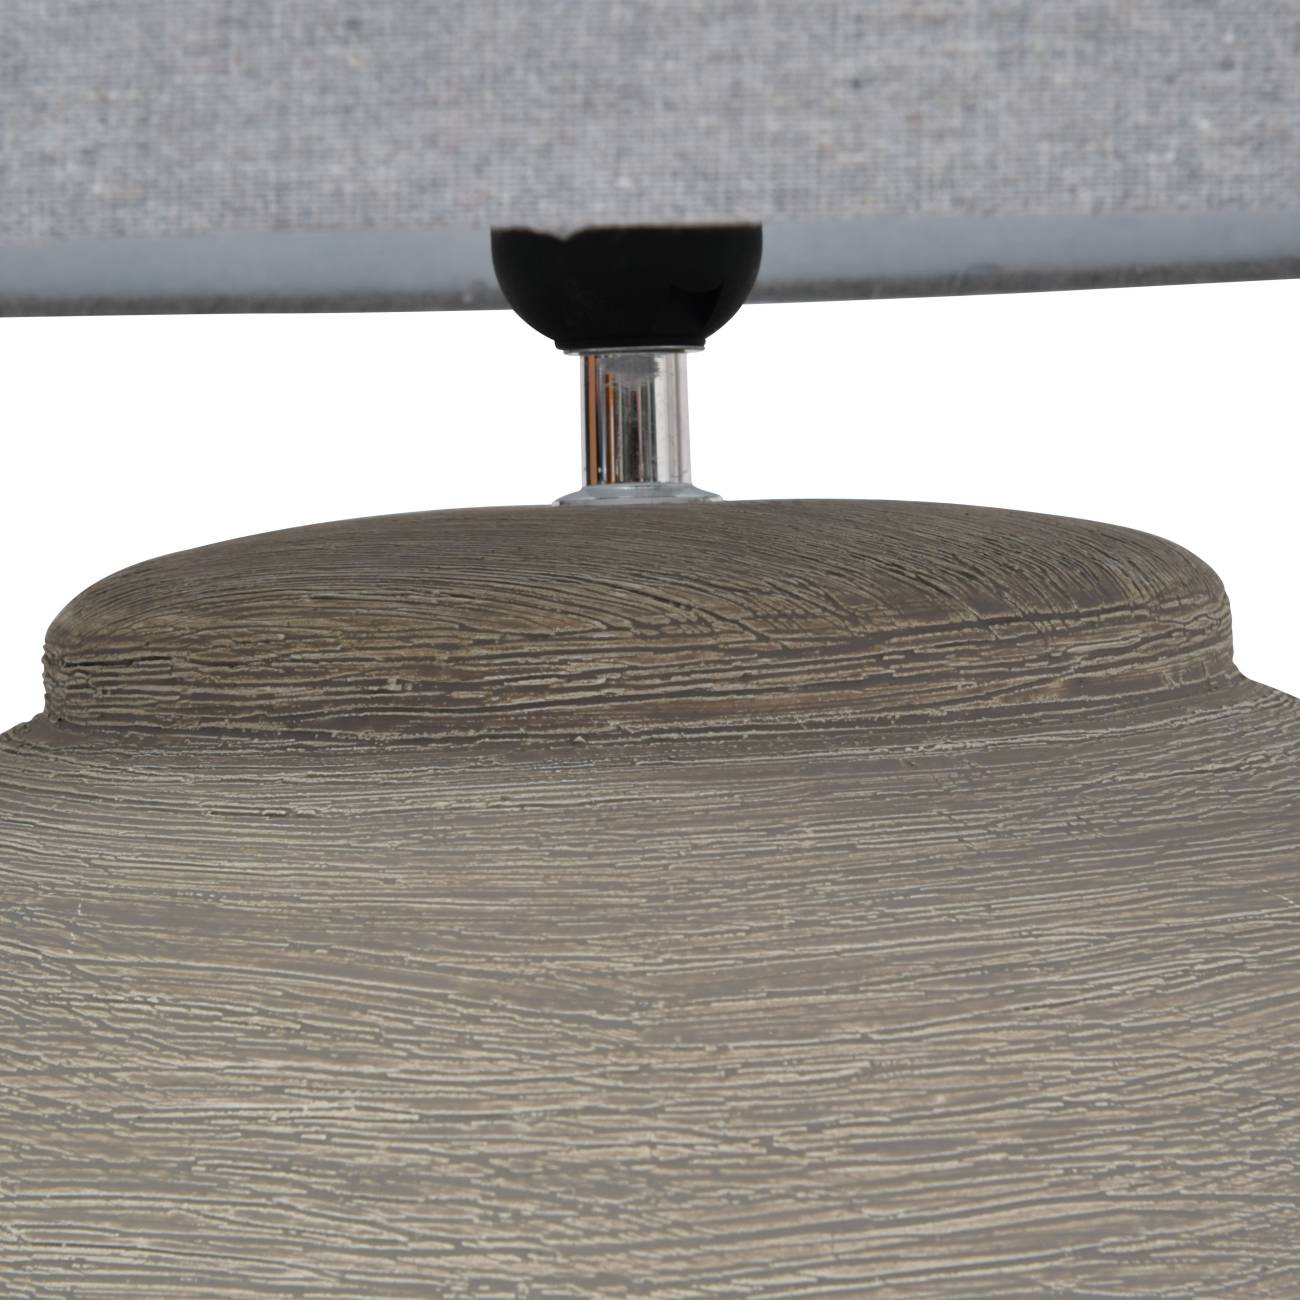 Maslowe Etched Grey Small Ceramic Lamp with Shade - E27 60W